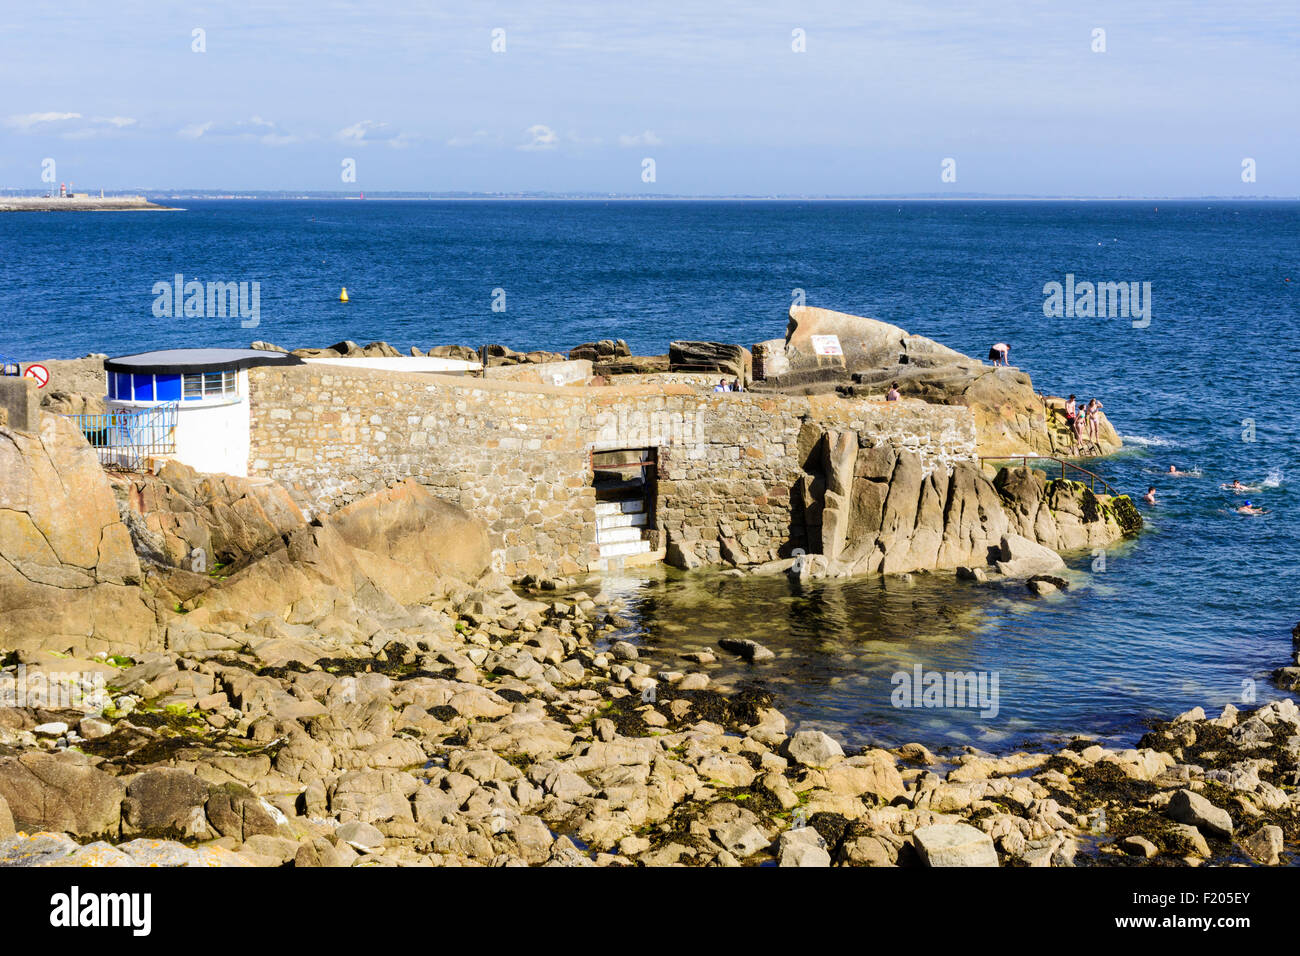 People swimming at Forty Foot bathing place, Sandycove, Dun Laoghaire–Rathdown, Ireland Stock Photo